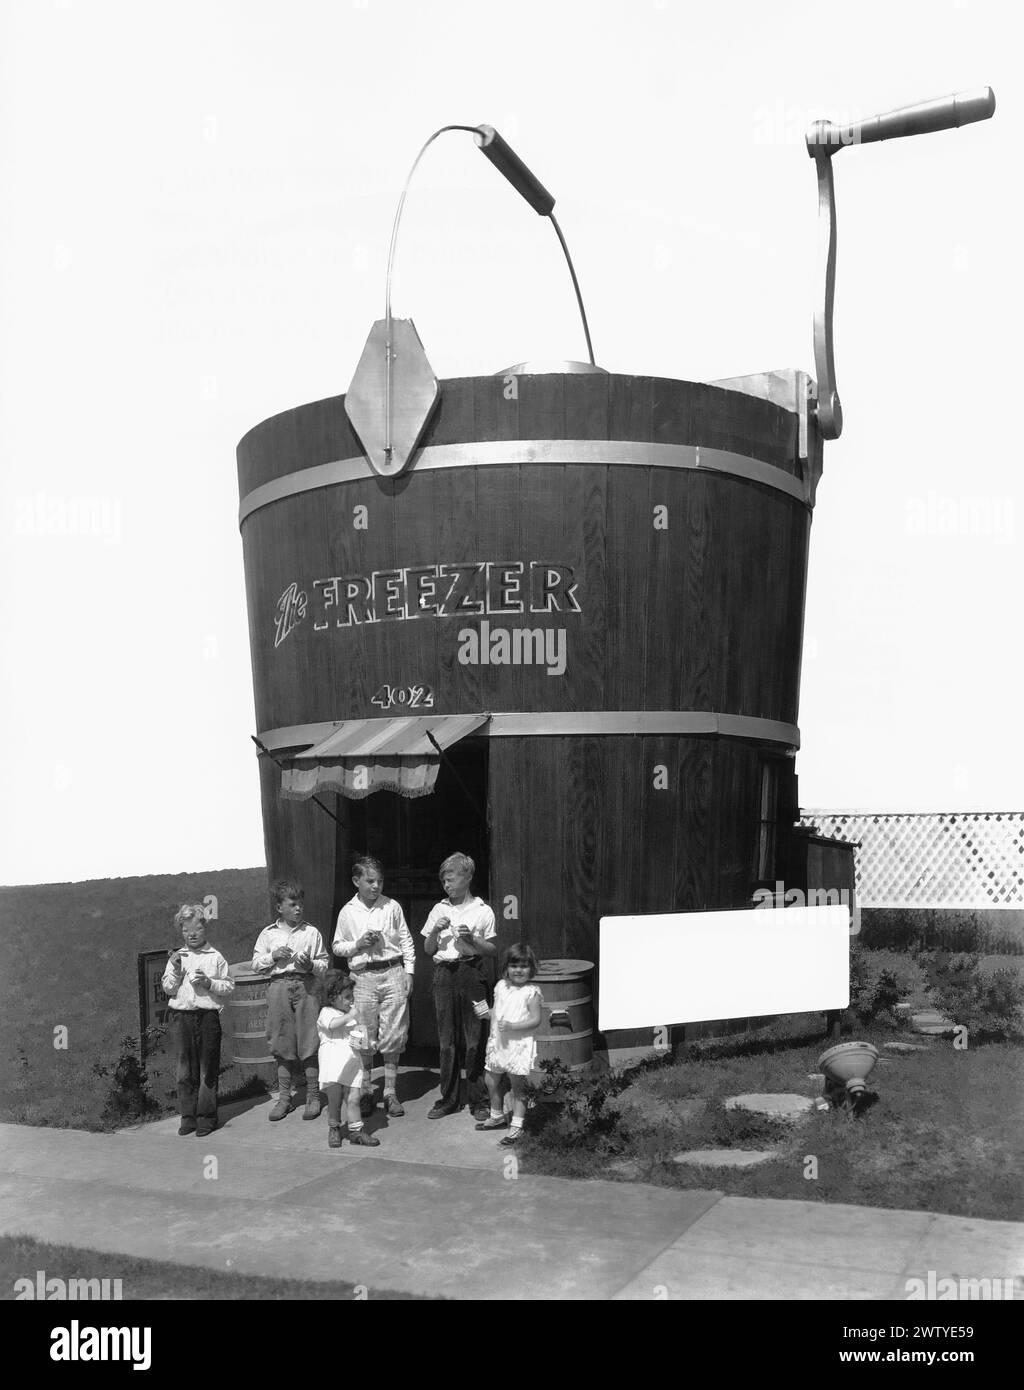 Handful of children standing out front of an ice cream store named The Freezer in the shape of an old fashion bucket with a crank Stock Photo